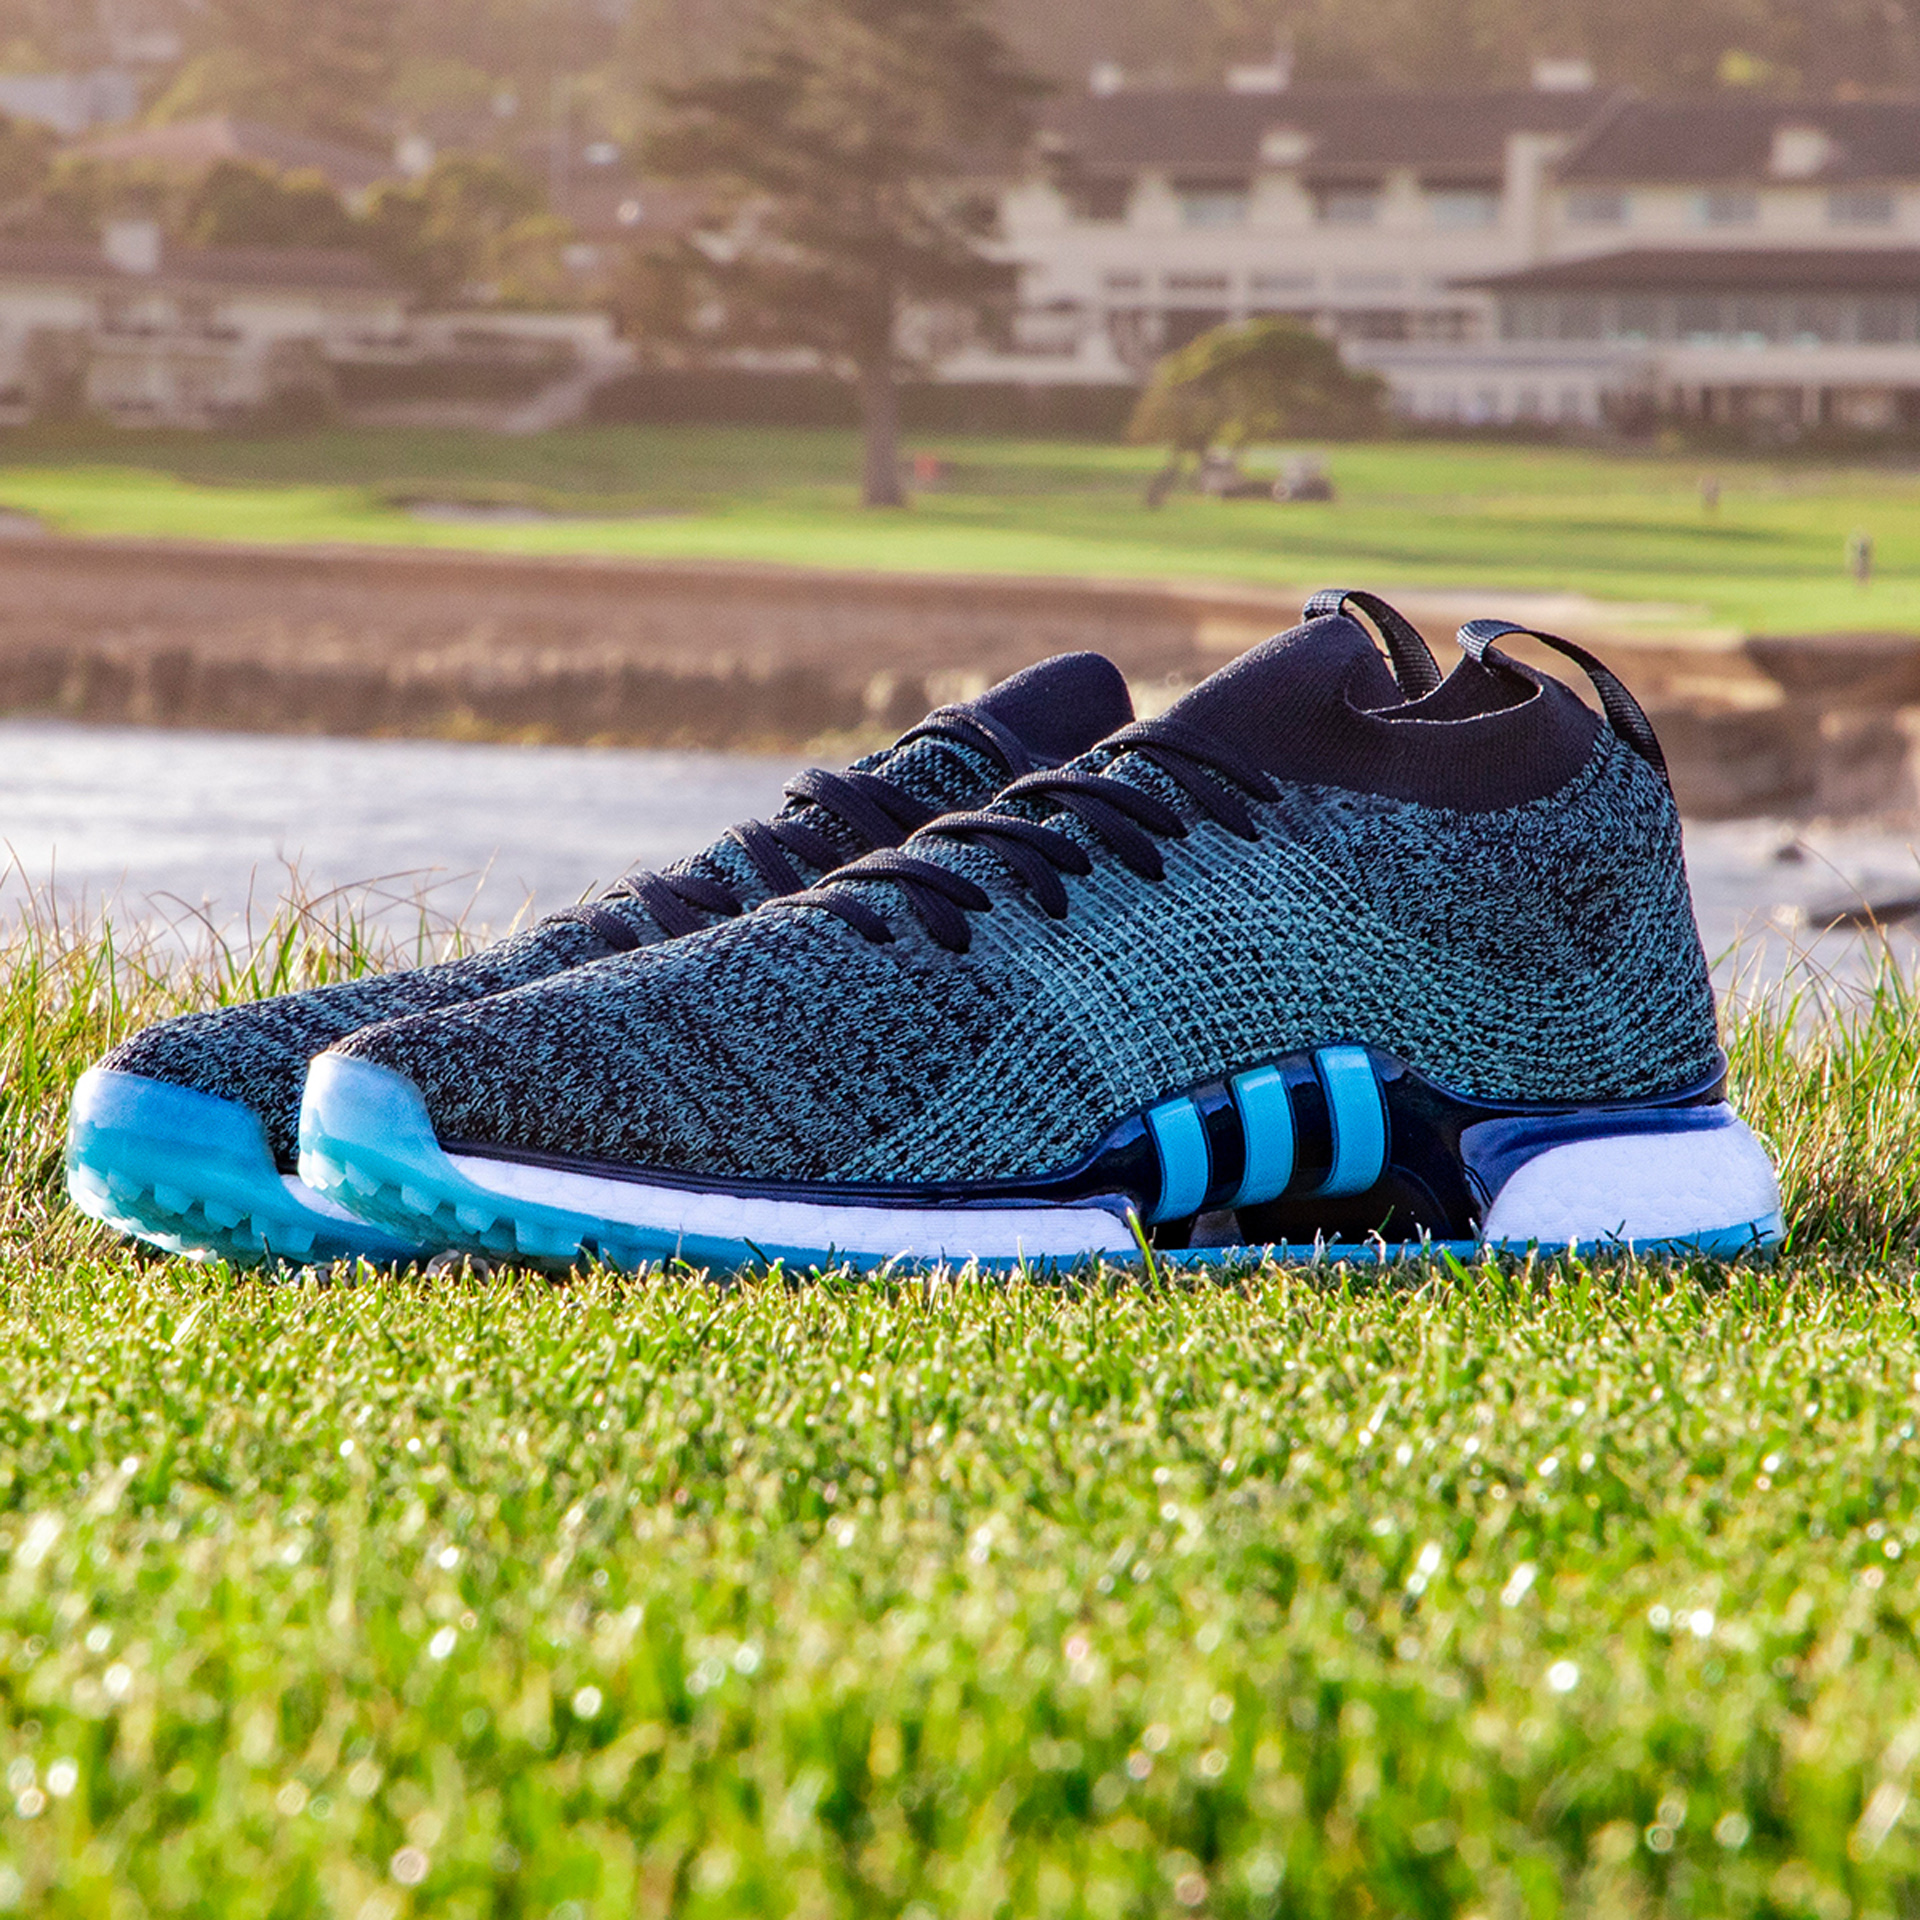 Adidas' new TOUR360 XT golf shoes are 